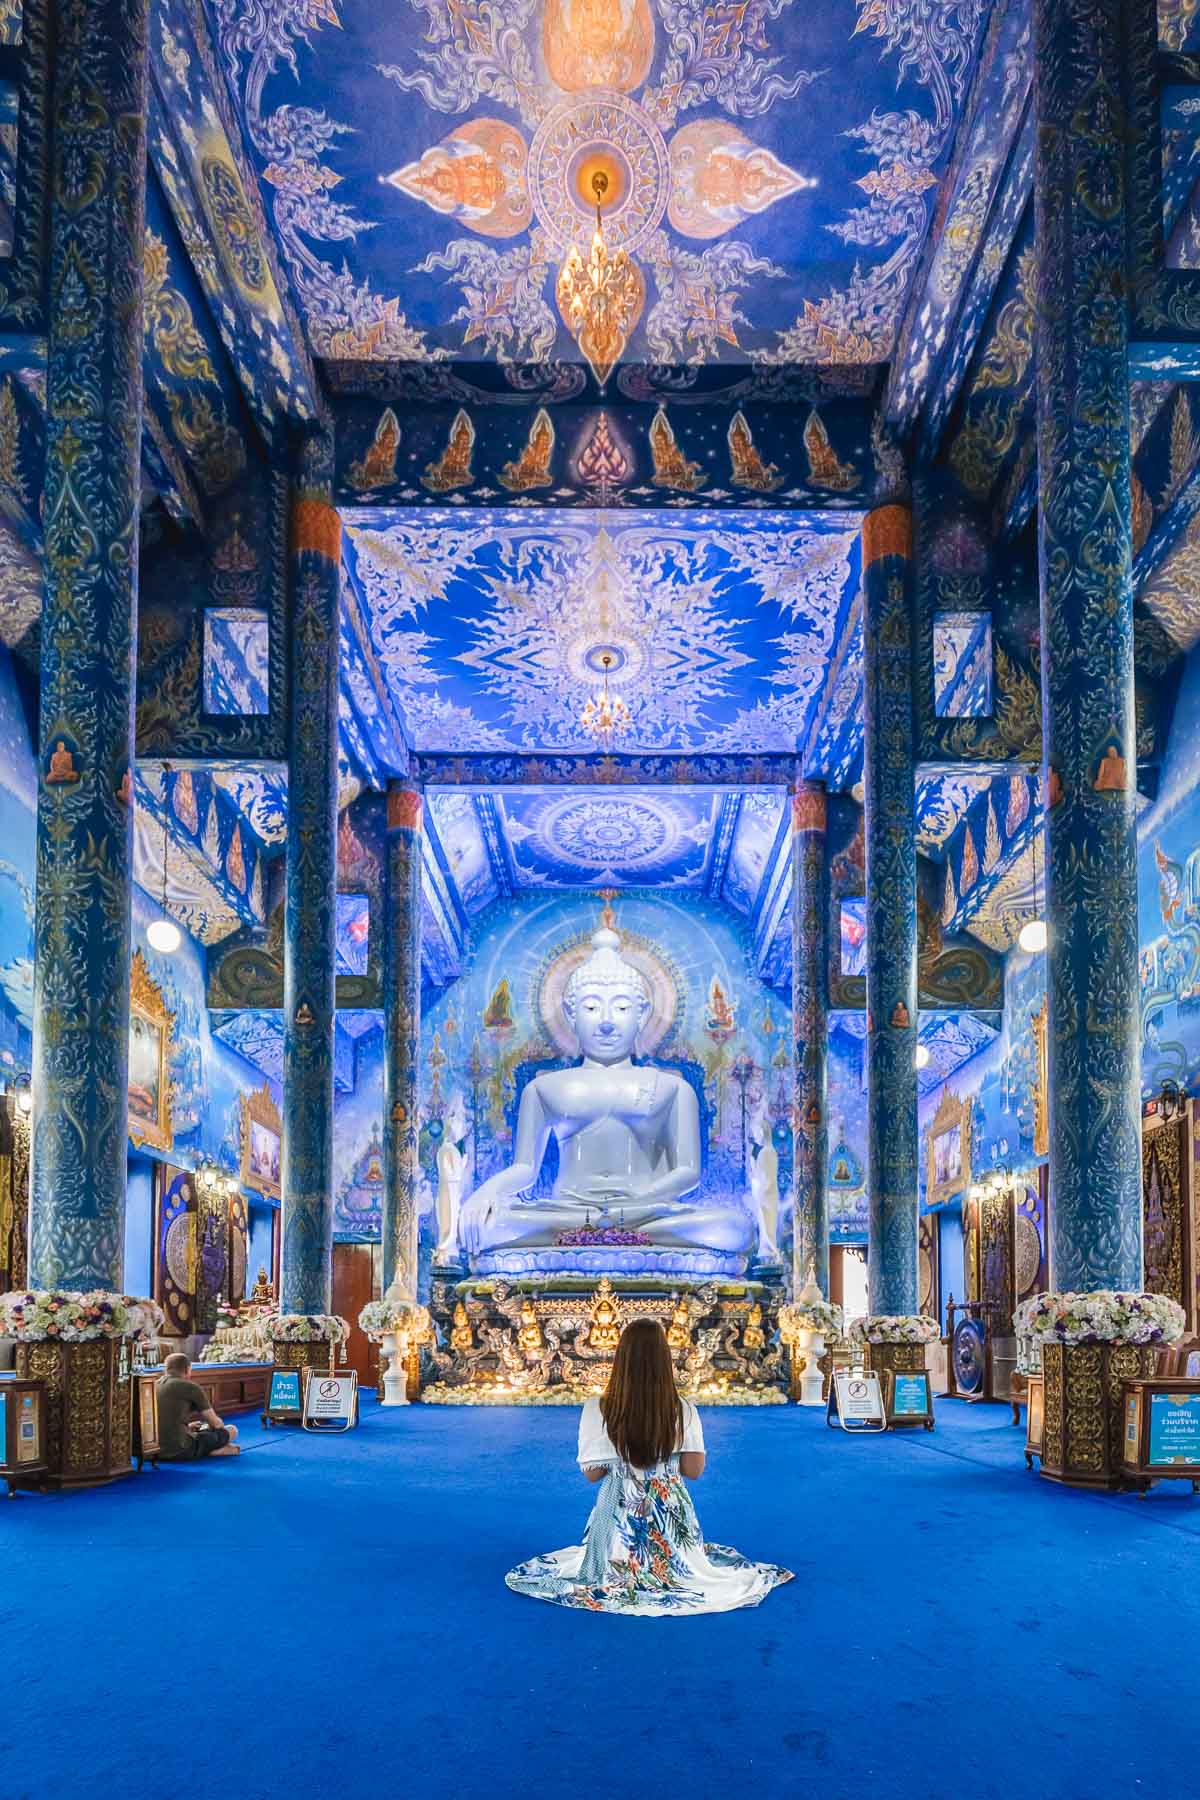 Girl in a blue dress sitting in front of a white Buddha statue in the Blue Temple in Chiang Rai